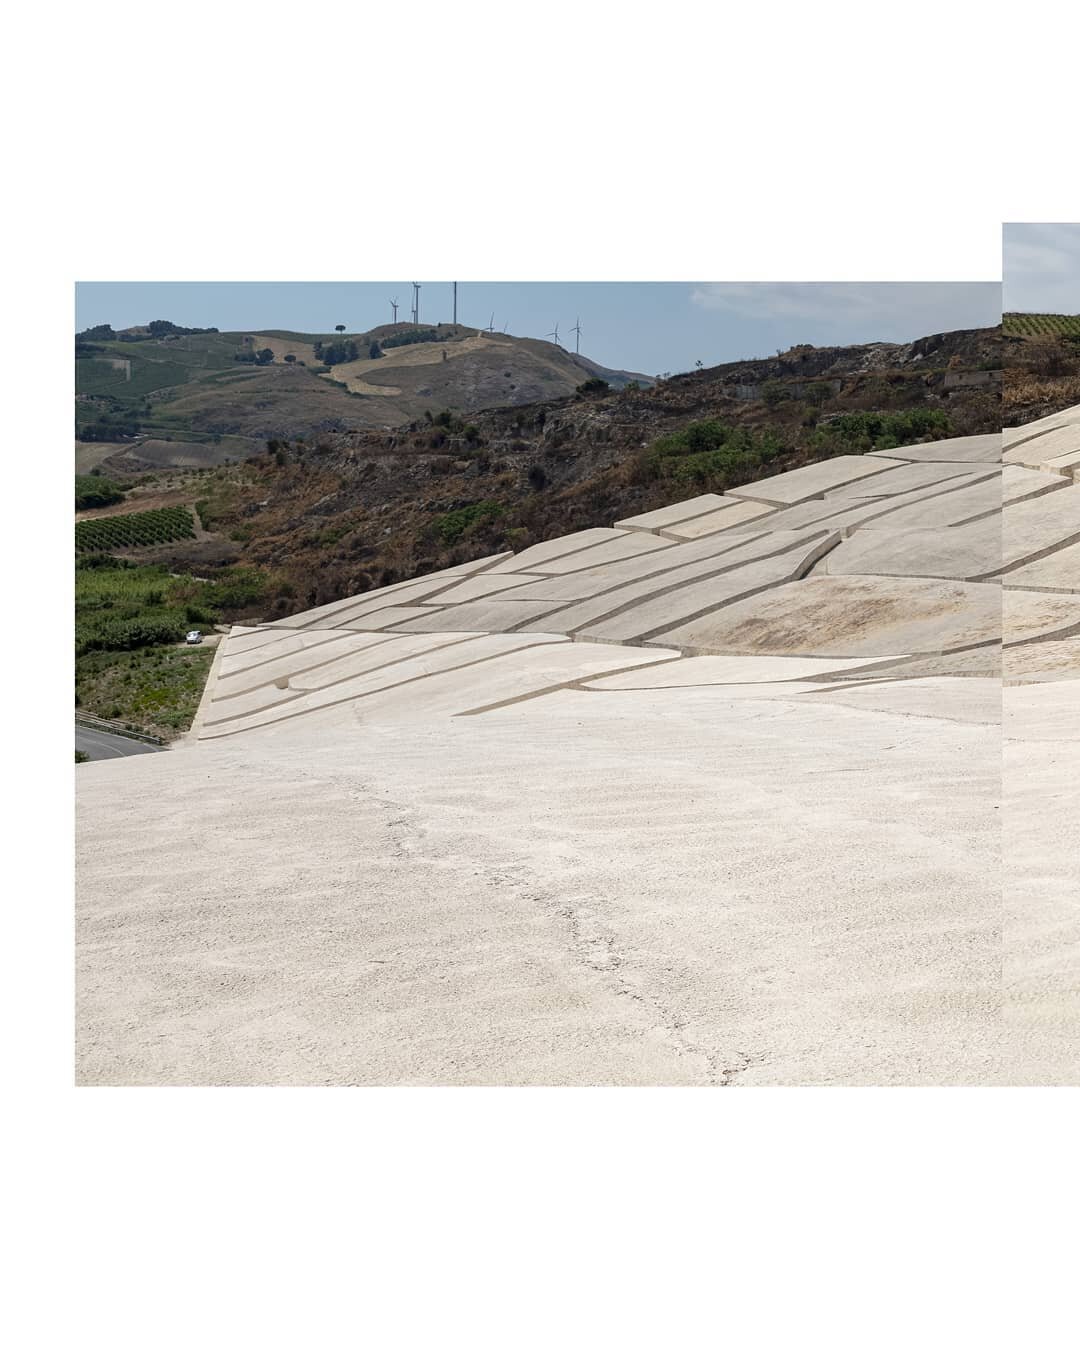 Cretto Di Burri in Sicily. This sculpture was made out of concrete, over the town of Gibellina, after it collapsed in an earthquake in 1968. It is a concrete map of the towns streets and alleyways, by the artist Alberto Burri.
. 
. 
@canonaustraliapr